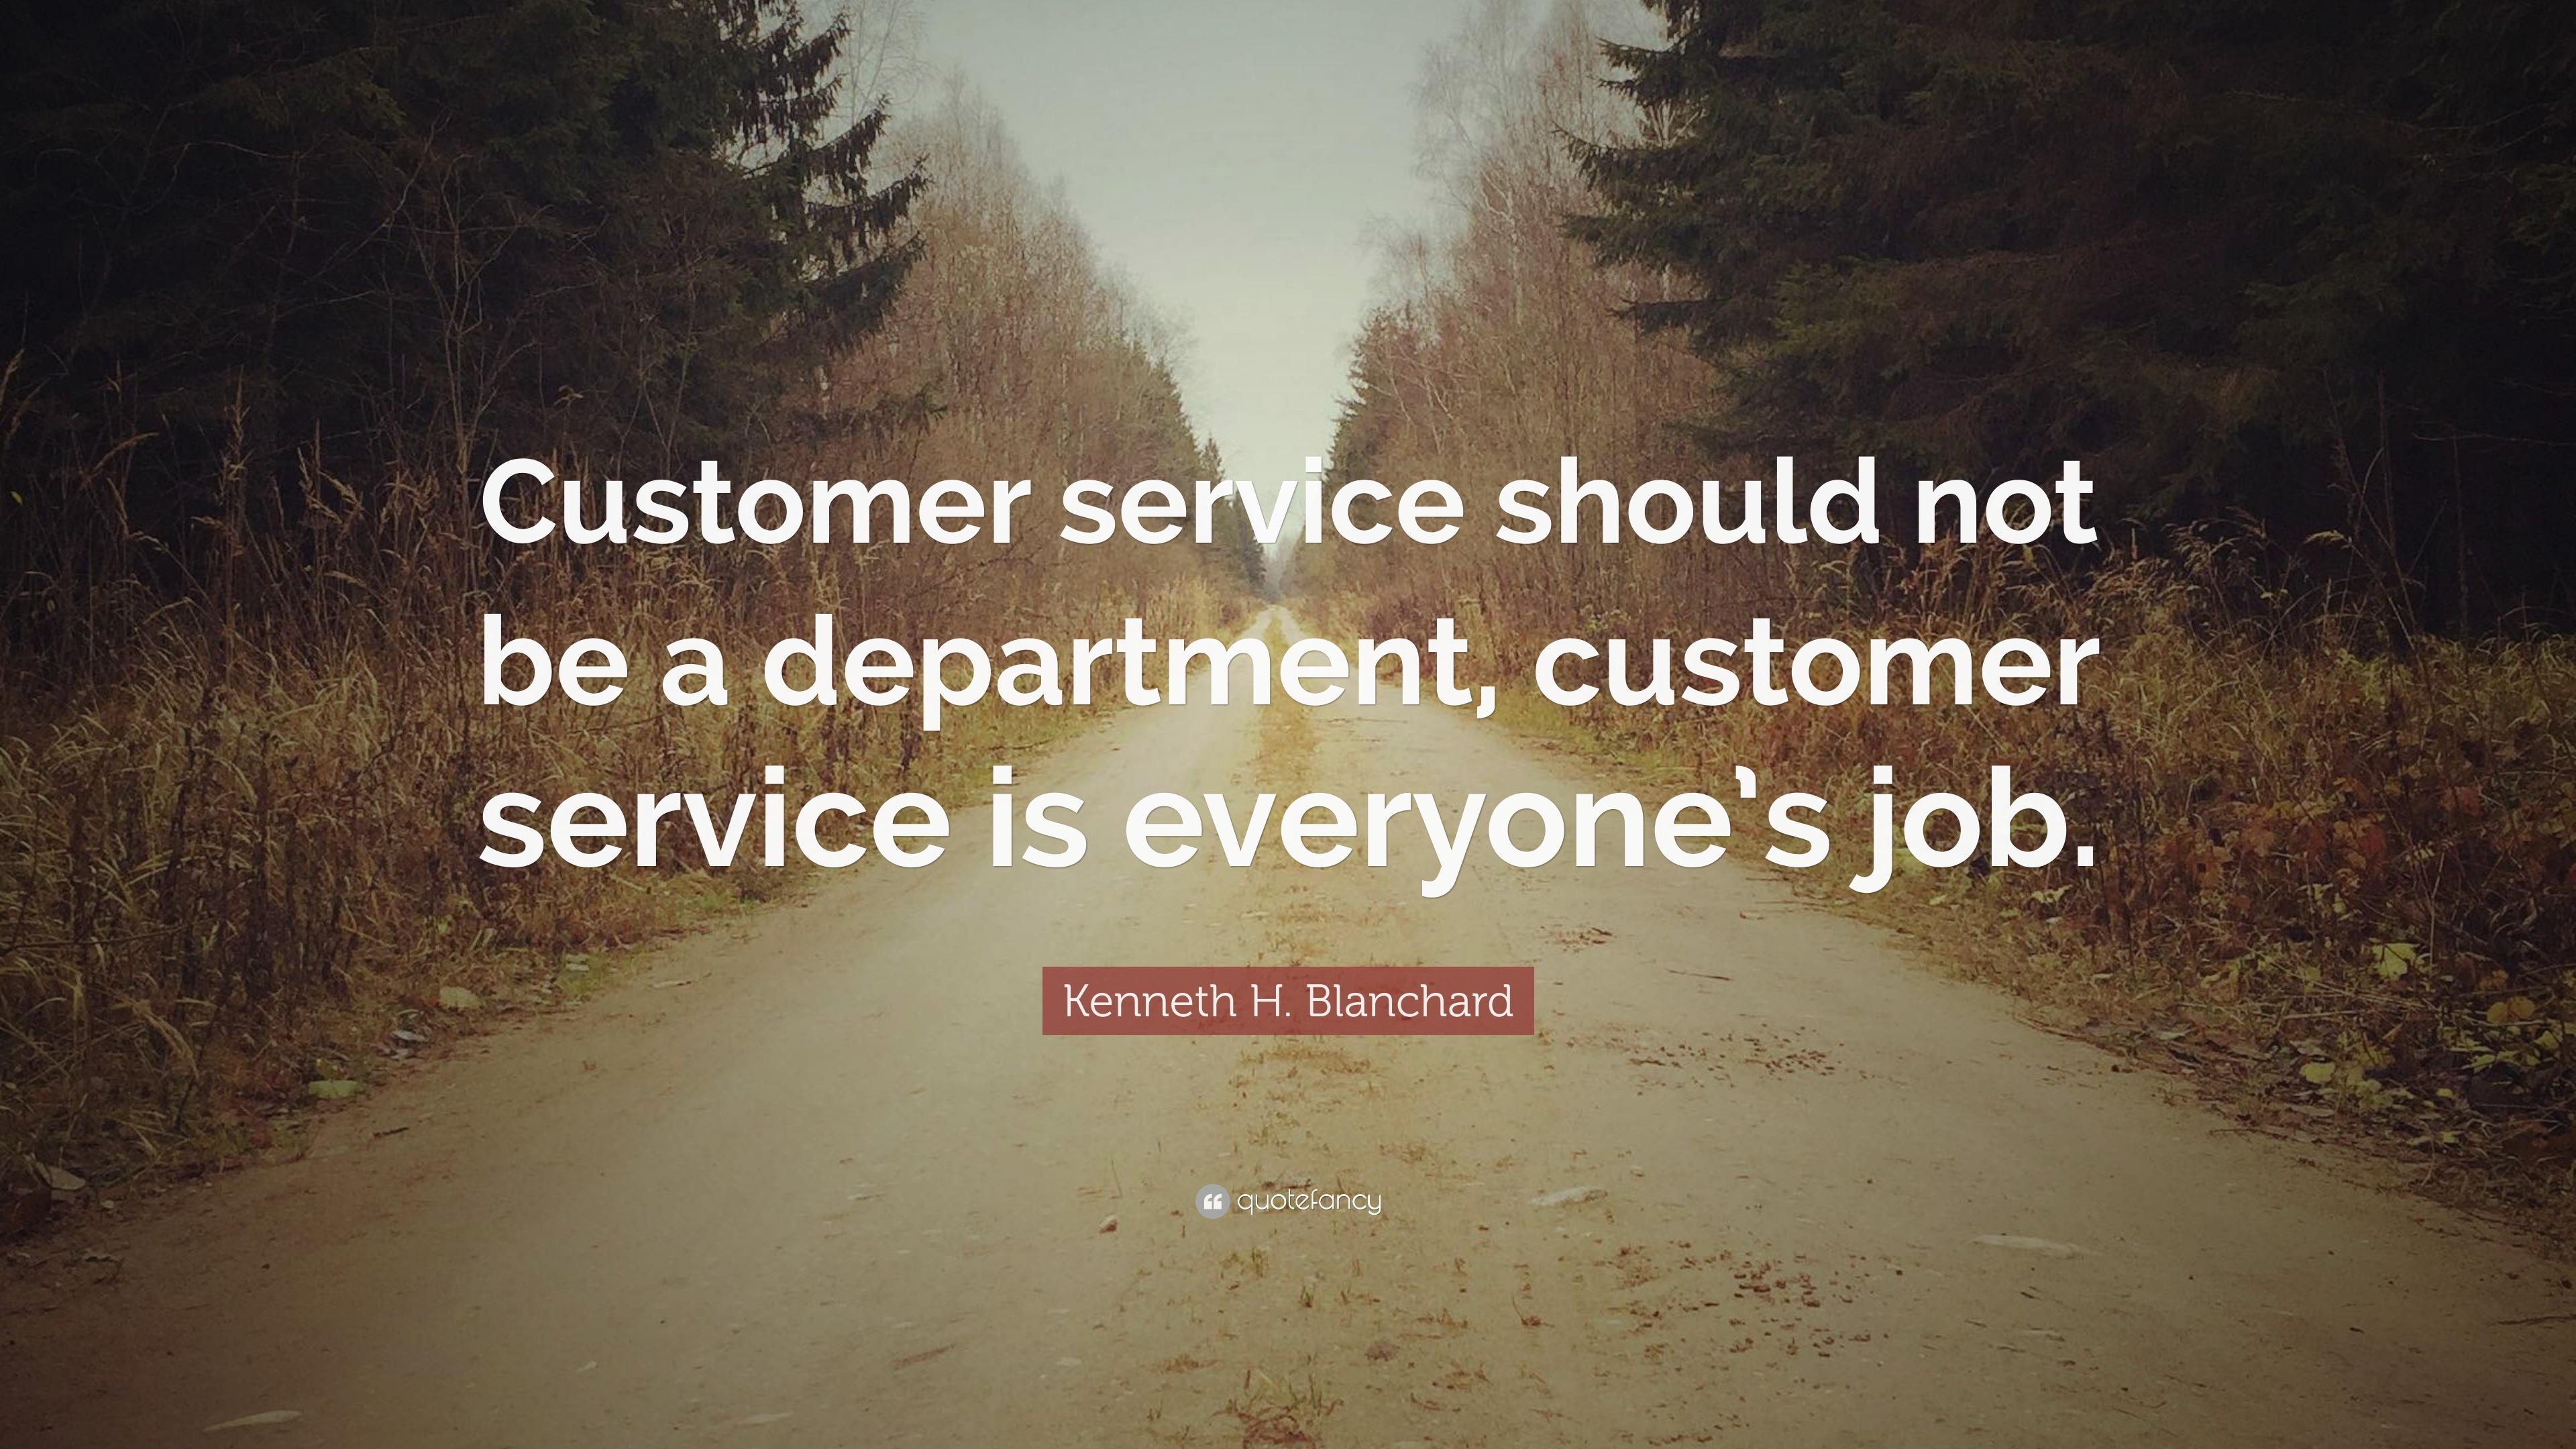 H. Blanchard Quote “Customer service should not be a